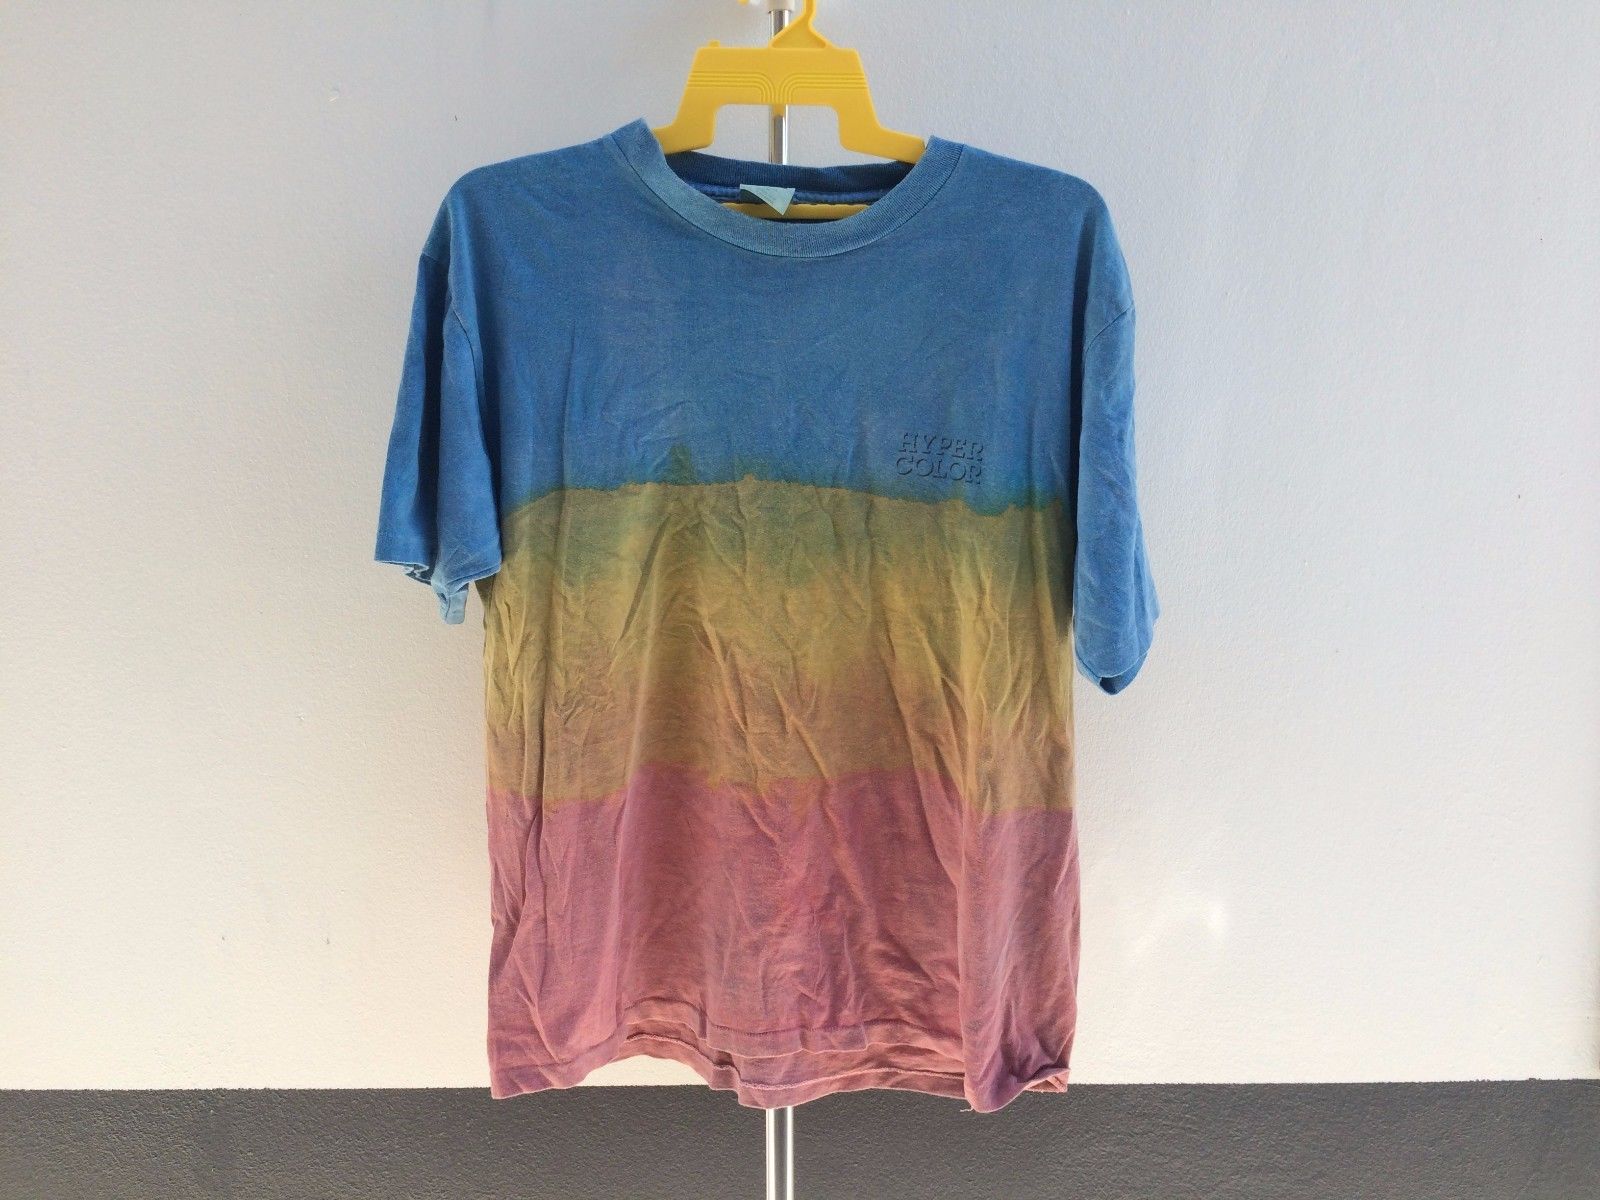 90s Kids Remember Exactly How Awkward These HyperColor Shirts Really Were